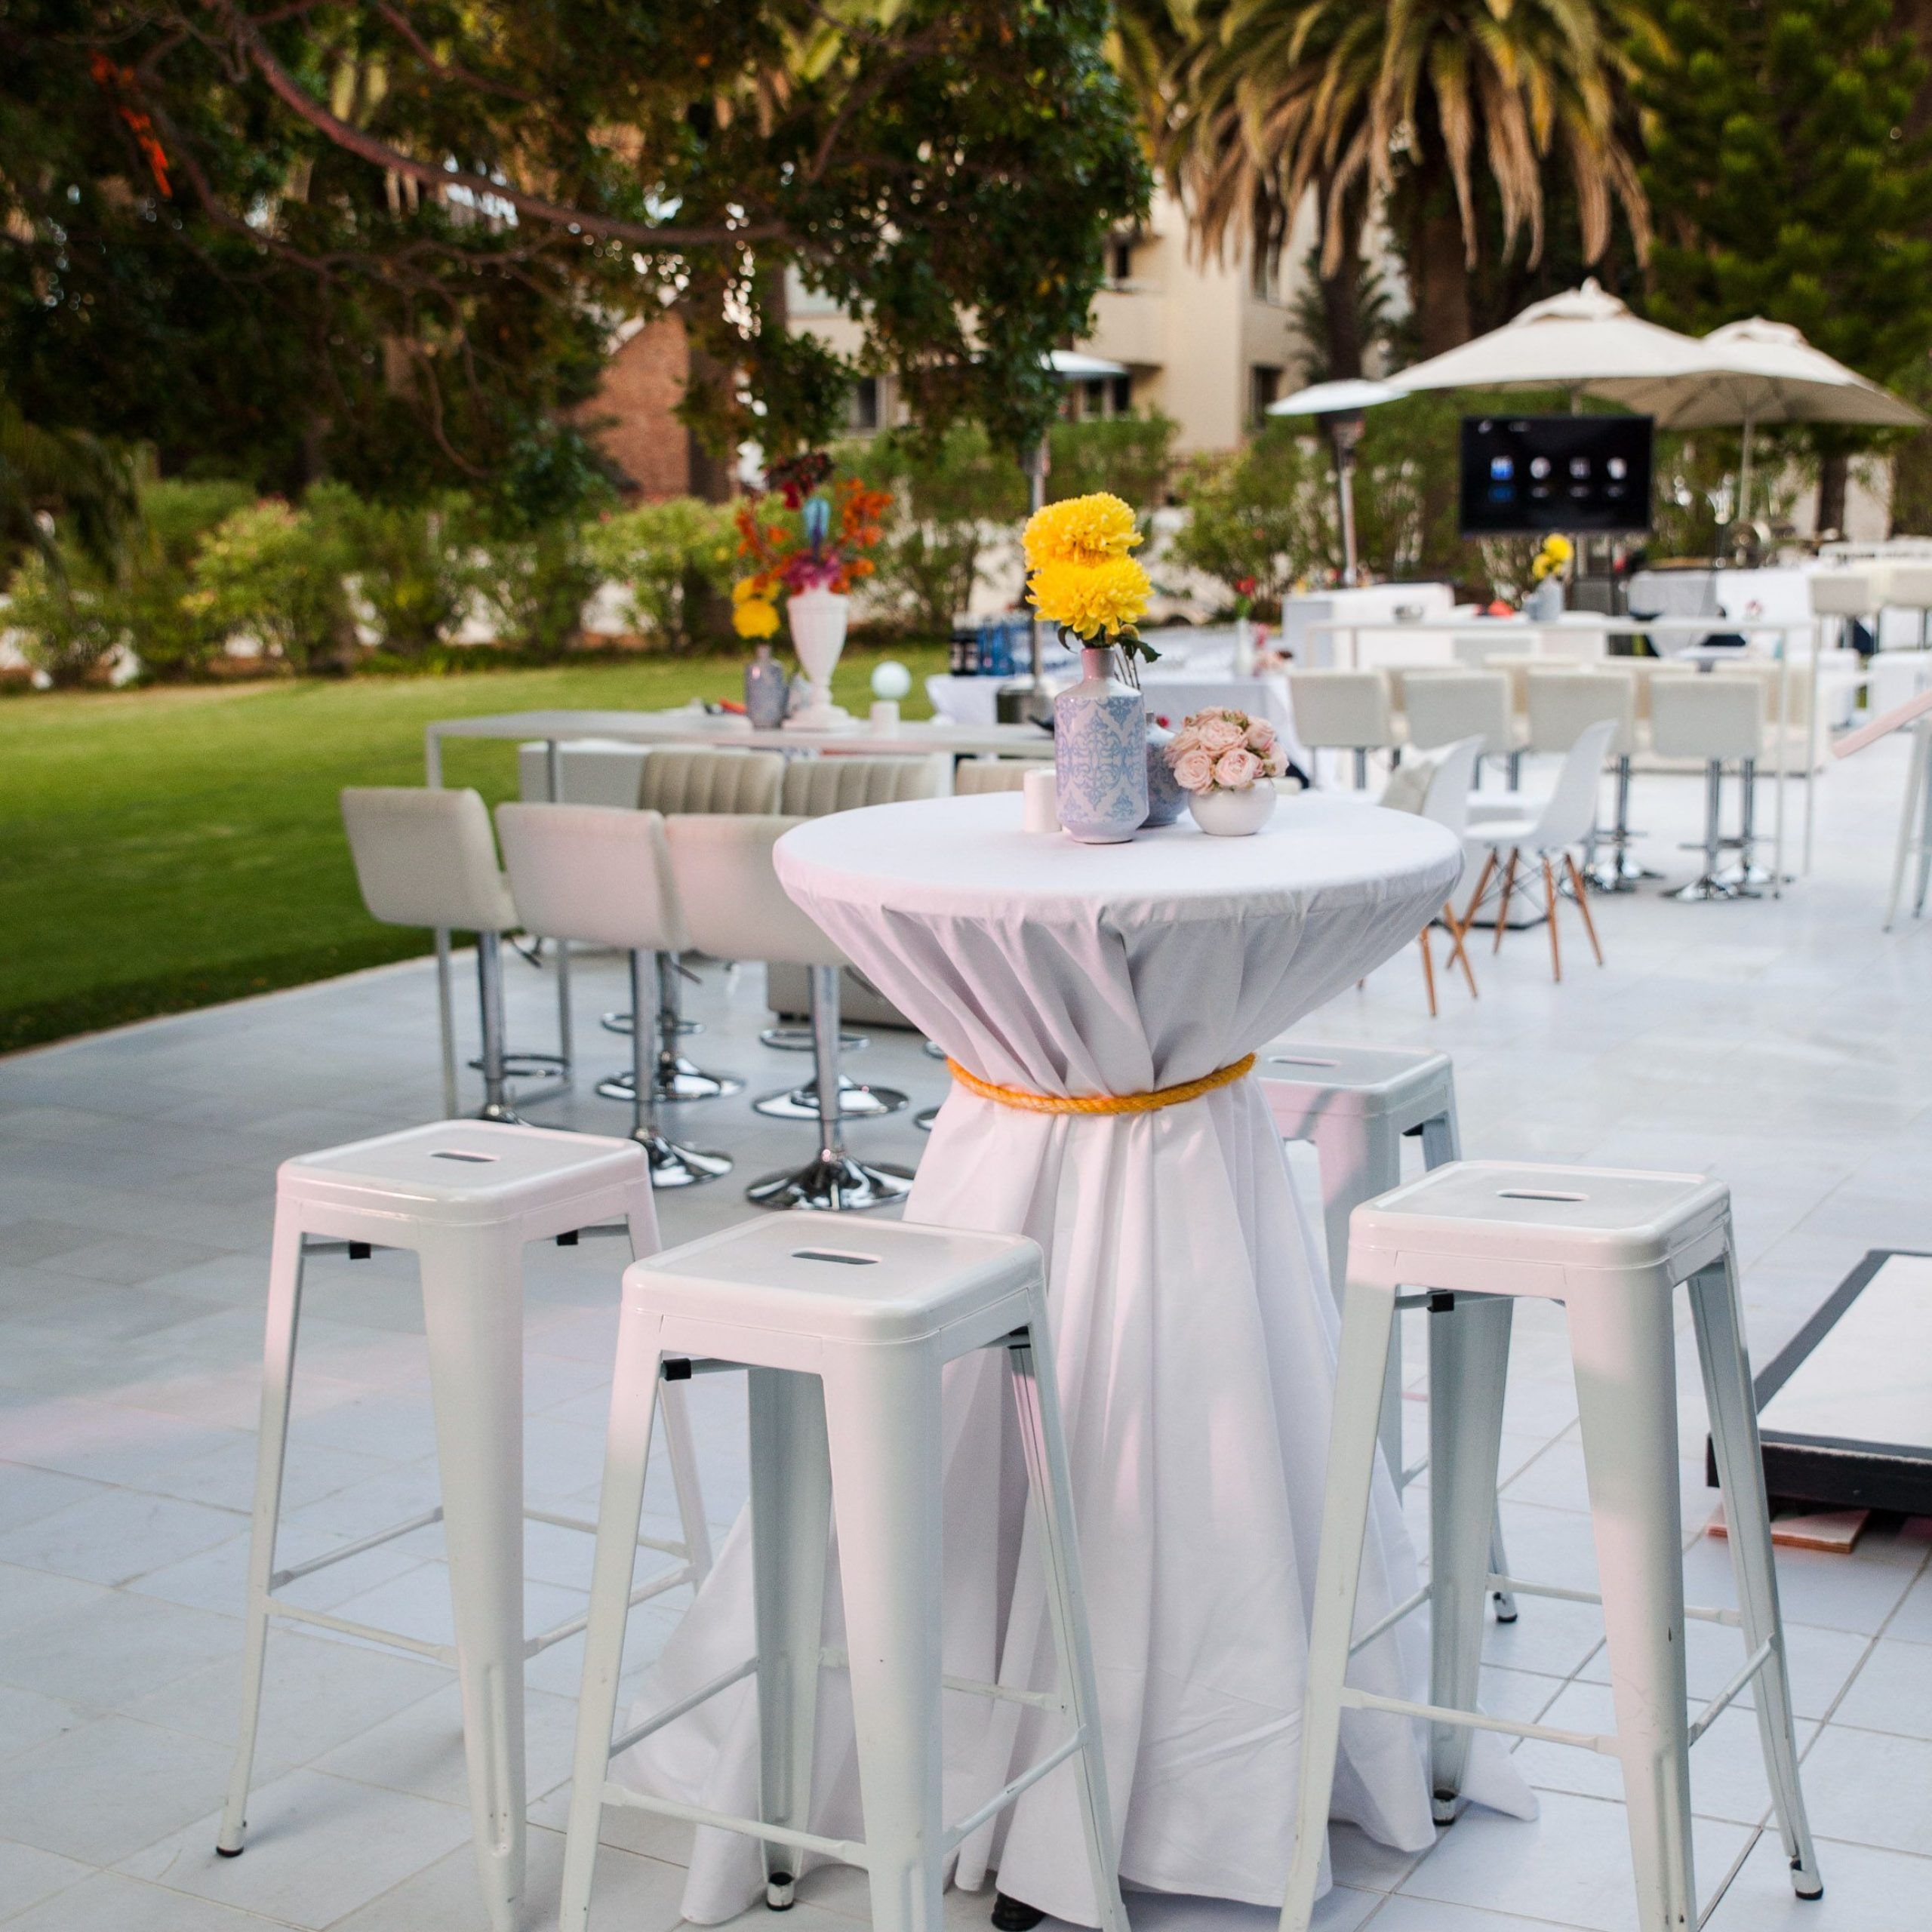 White Cocktail Furniture At An Outdoor Event For Pre Drinks Outdoor Intended For Natural Outdoor Cocktail Tables (Gallery 5 of 20)